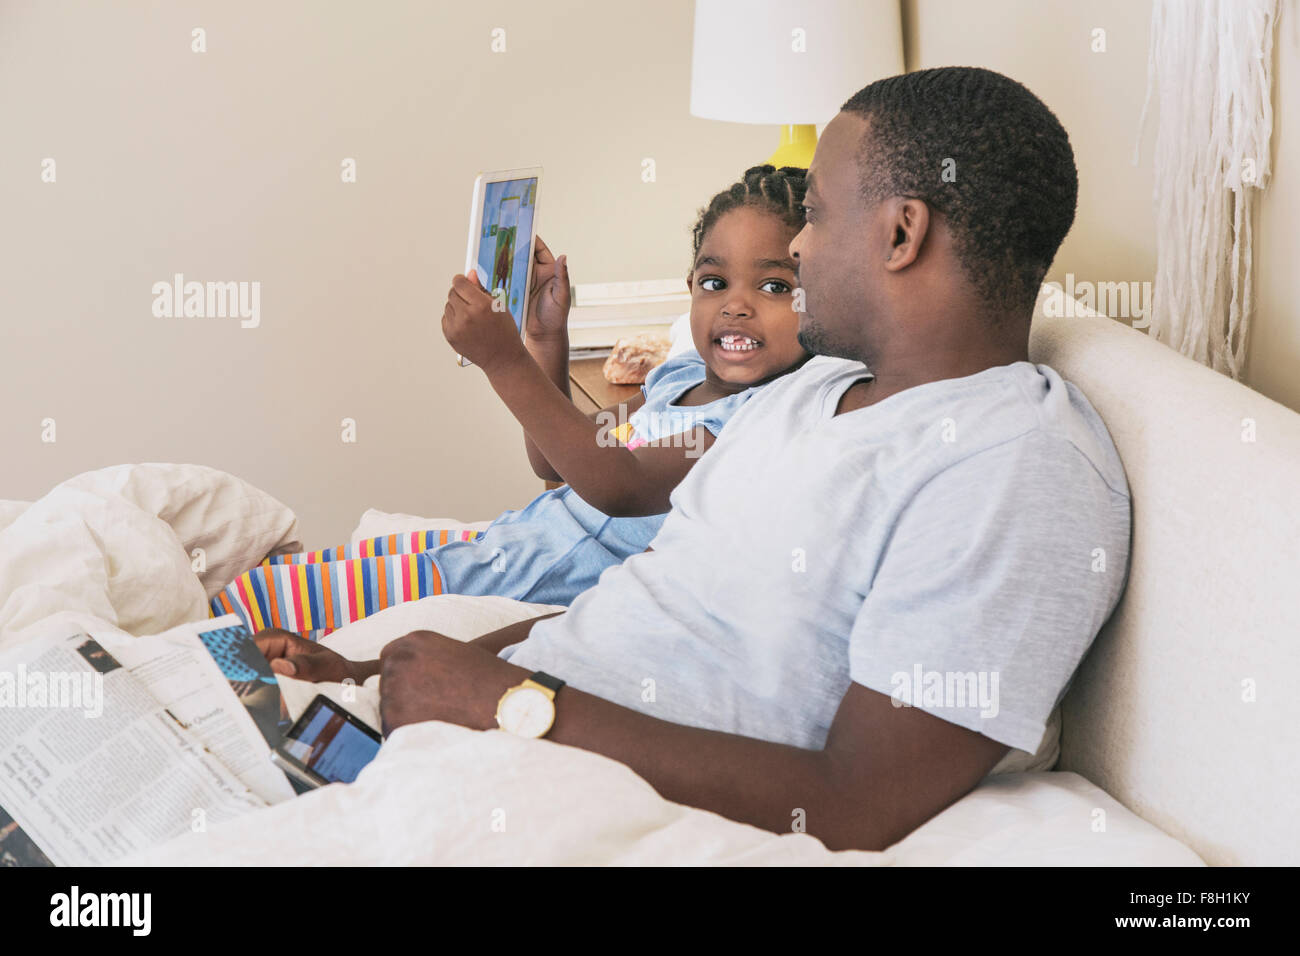 African American father and daughter using digital tablet on bed Stock Photo